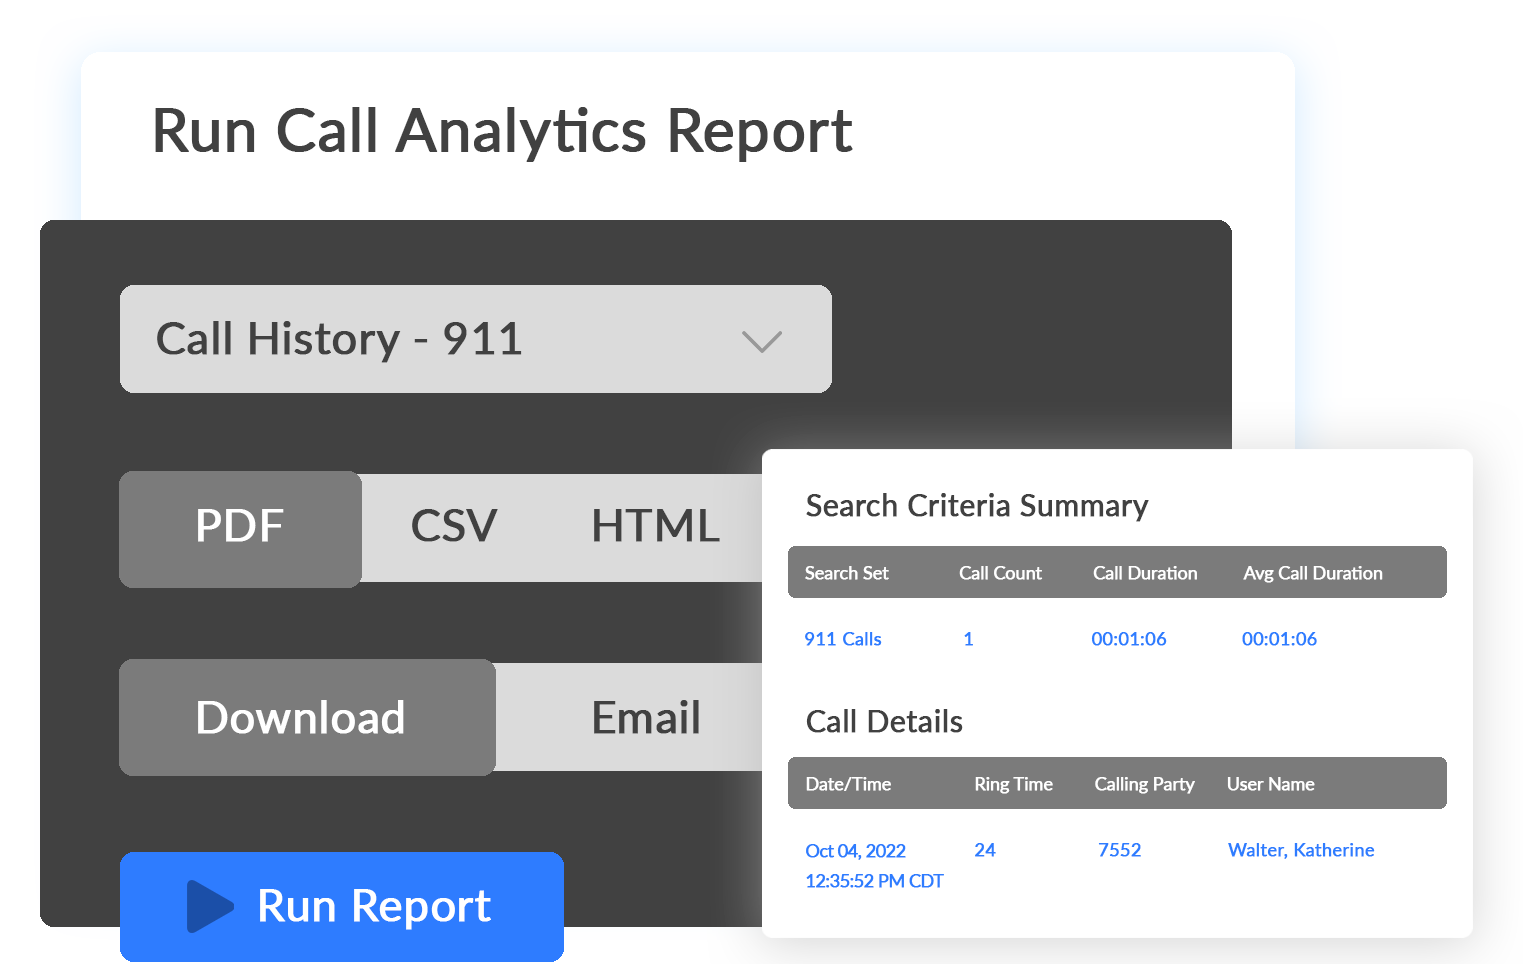 Find call details with a quick search.